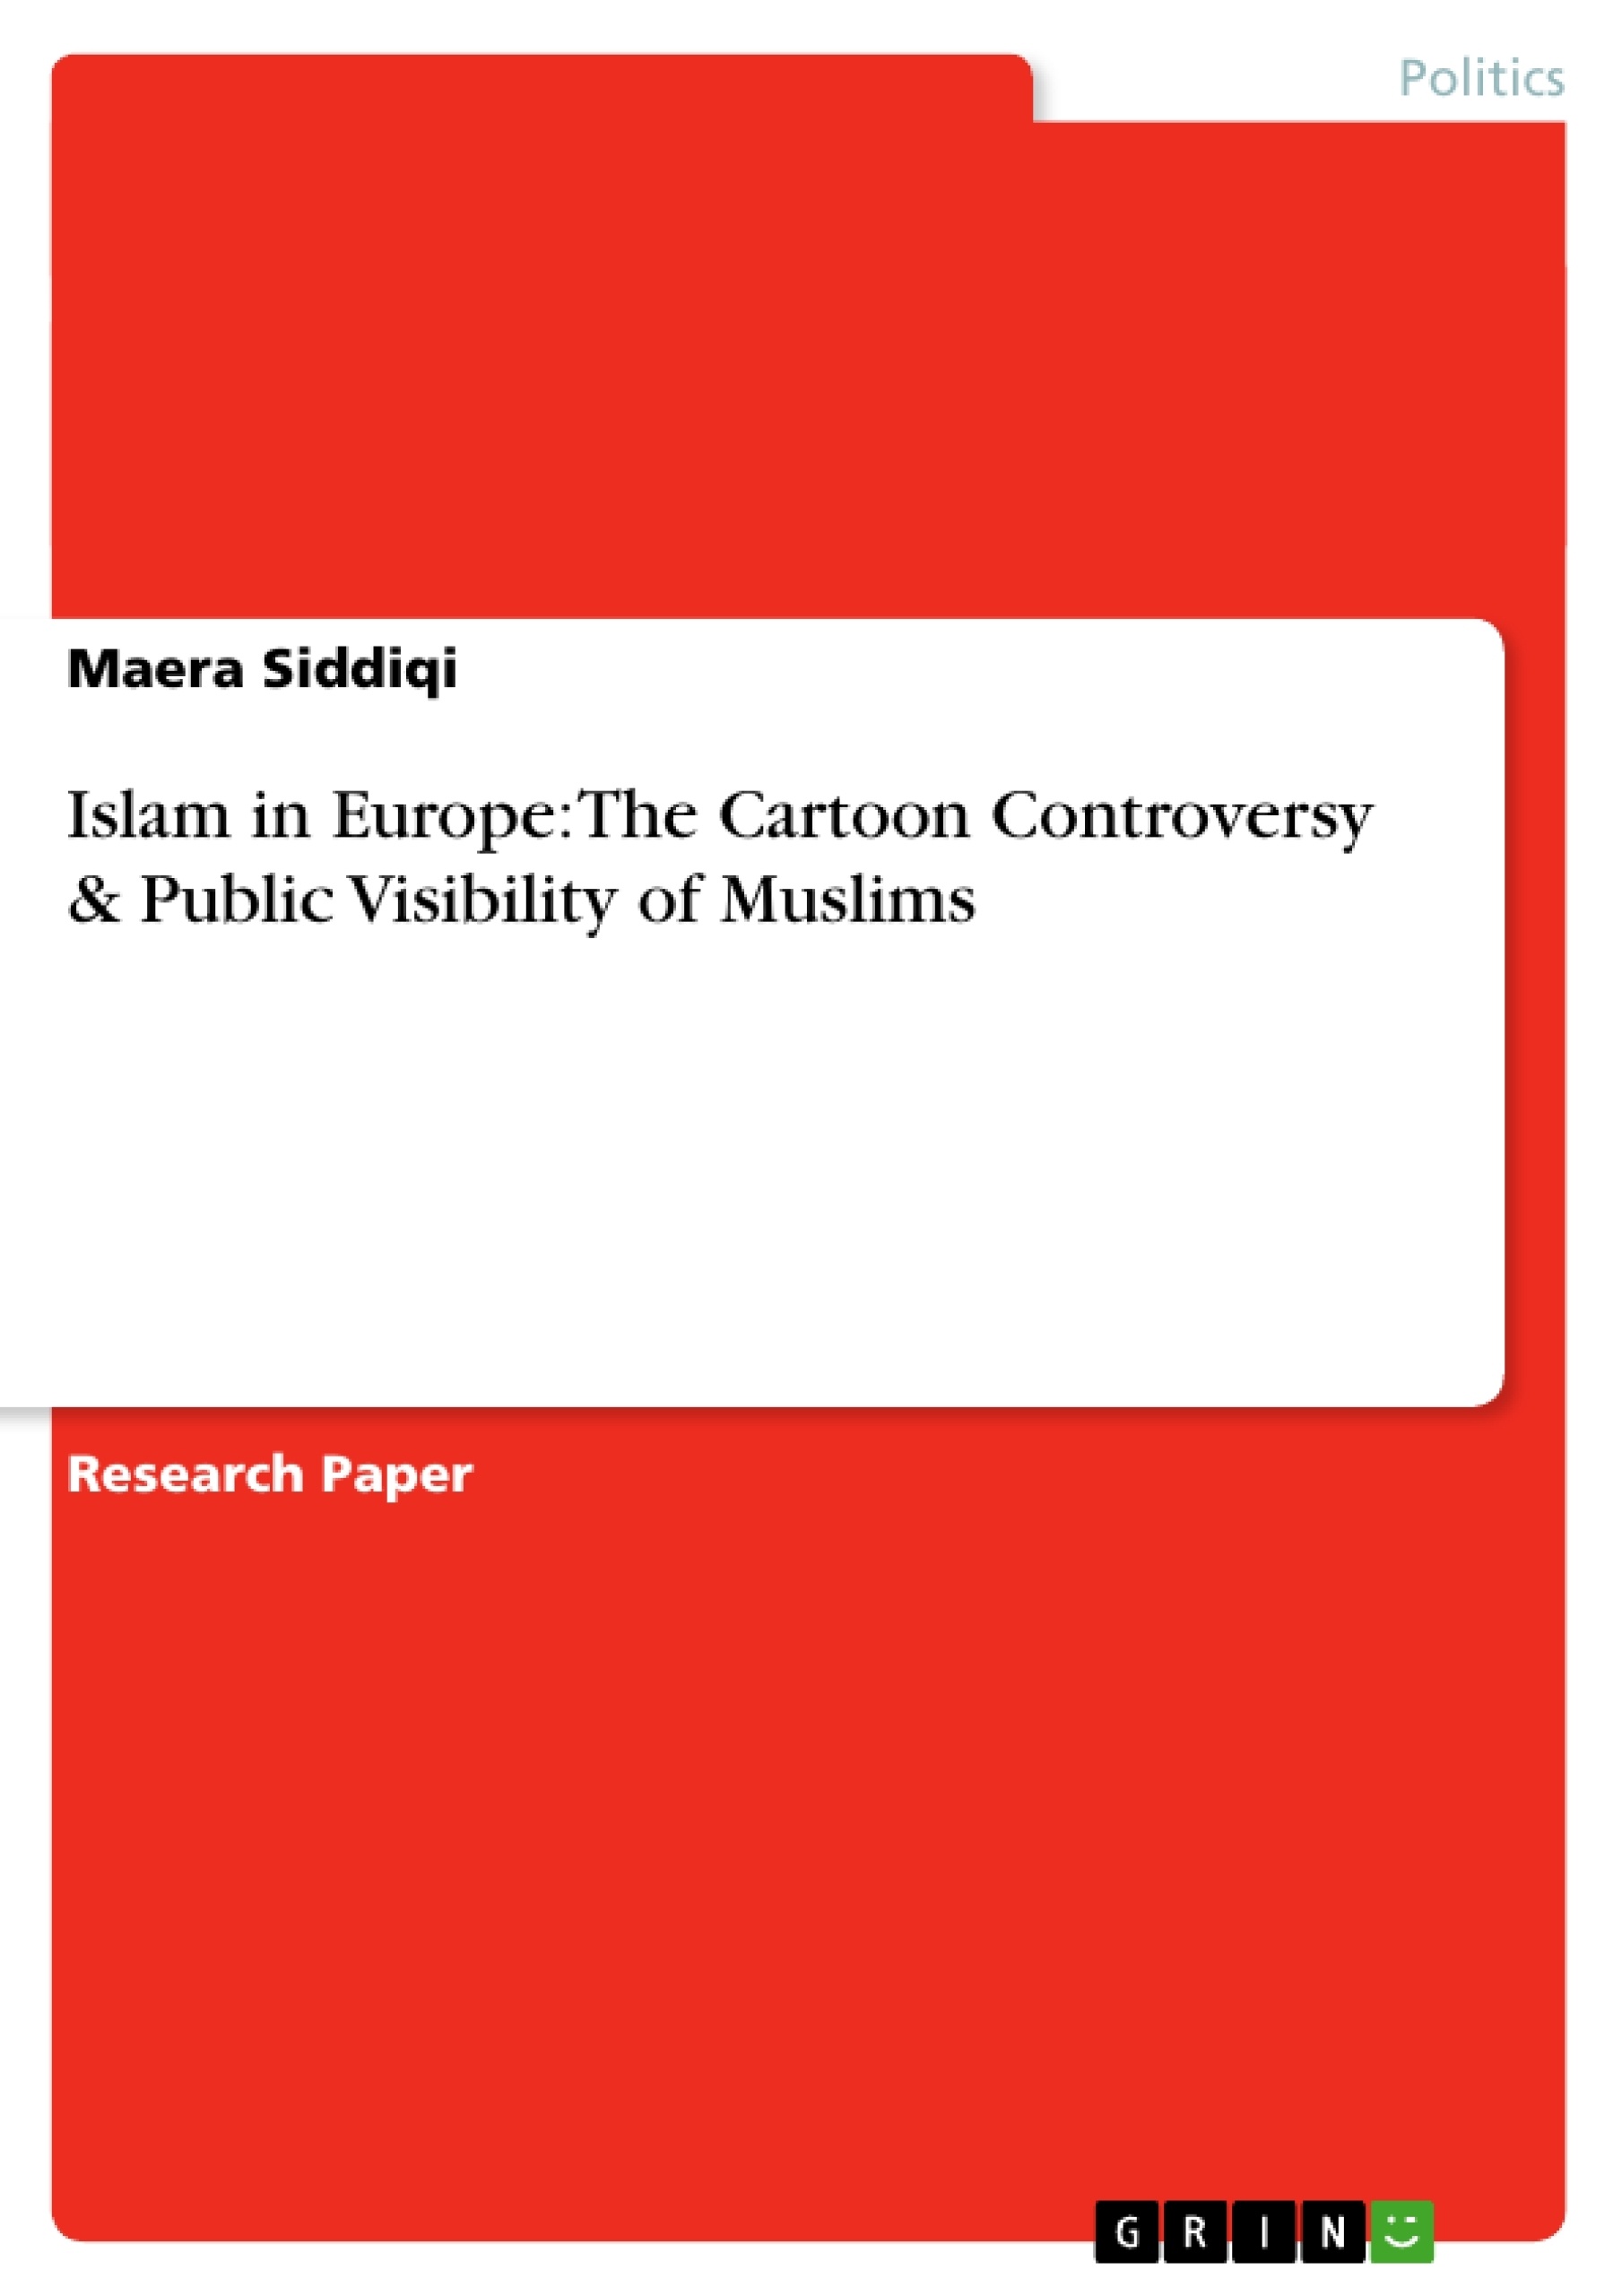 Titre: Islam in Europe: The Cartoon Controversy & Public Visibility of Muslims